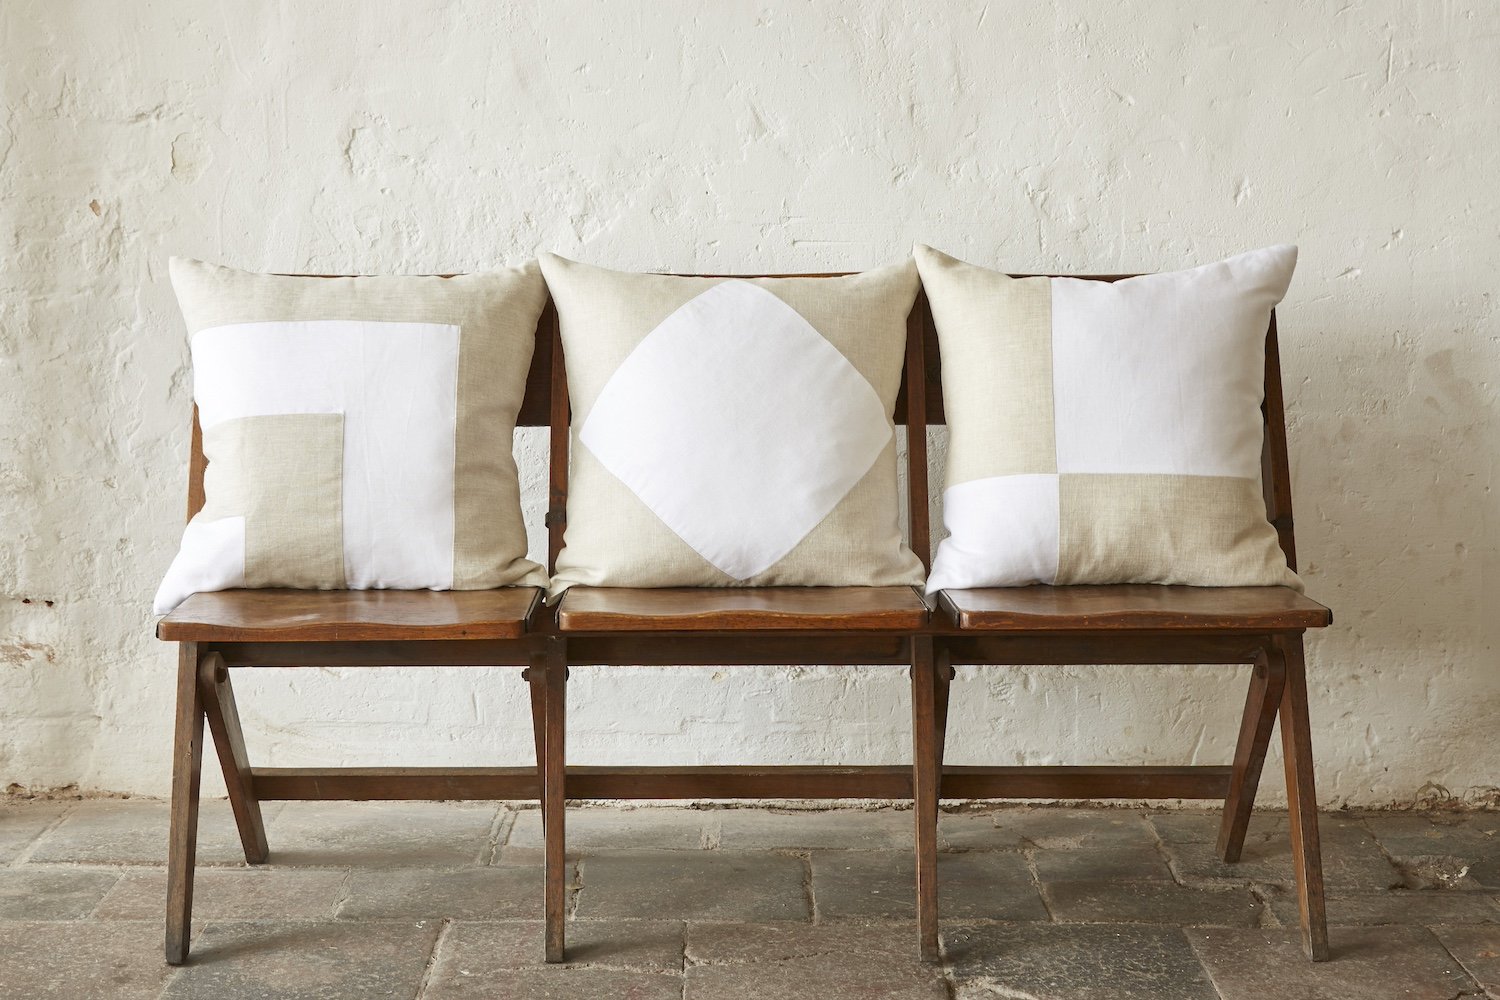 low res, Katie Larmour Design - Handcrafted Irish Linen Cushions Pillows by designer:maker Katie Larmour - Contemporary Heritage .jpg